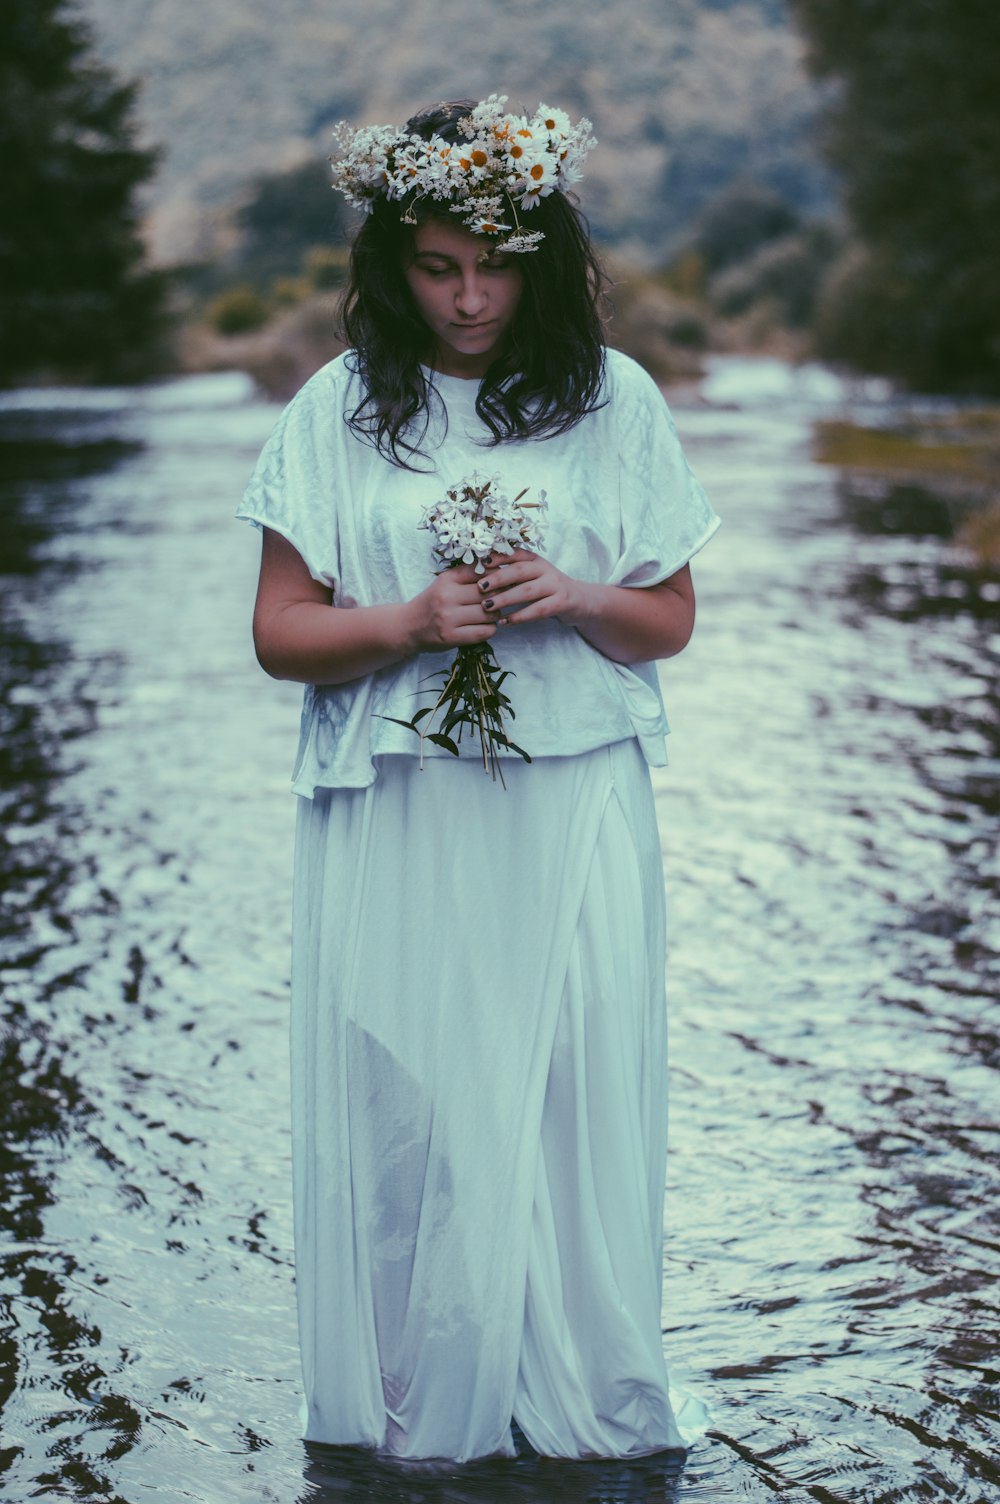 woman wearing dress and holding flower standing in body of water